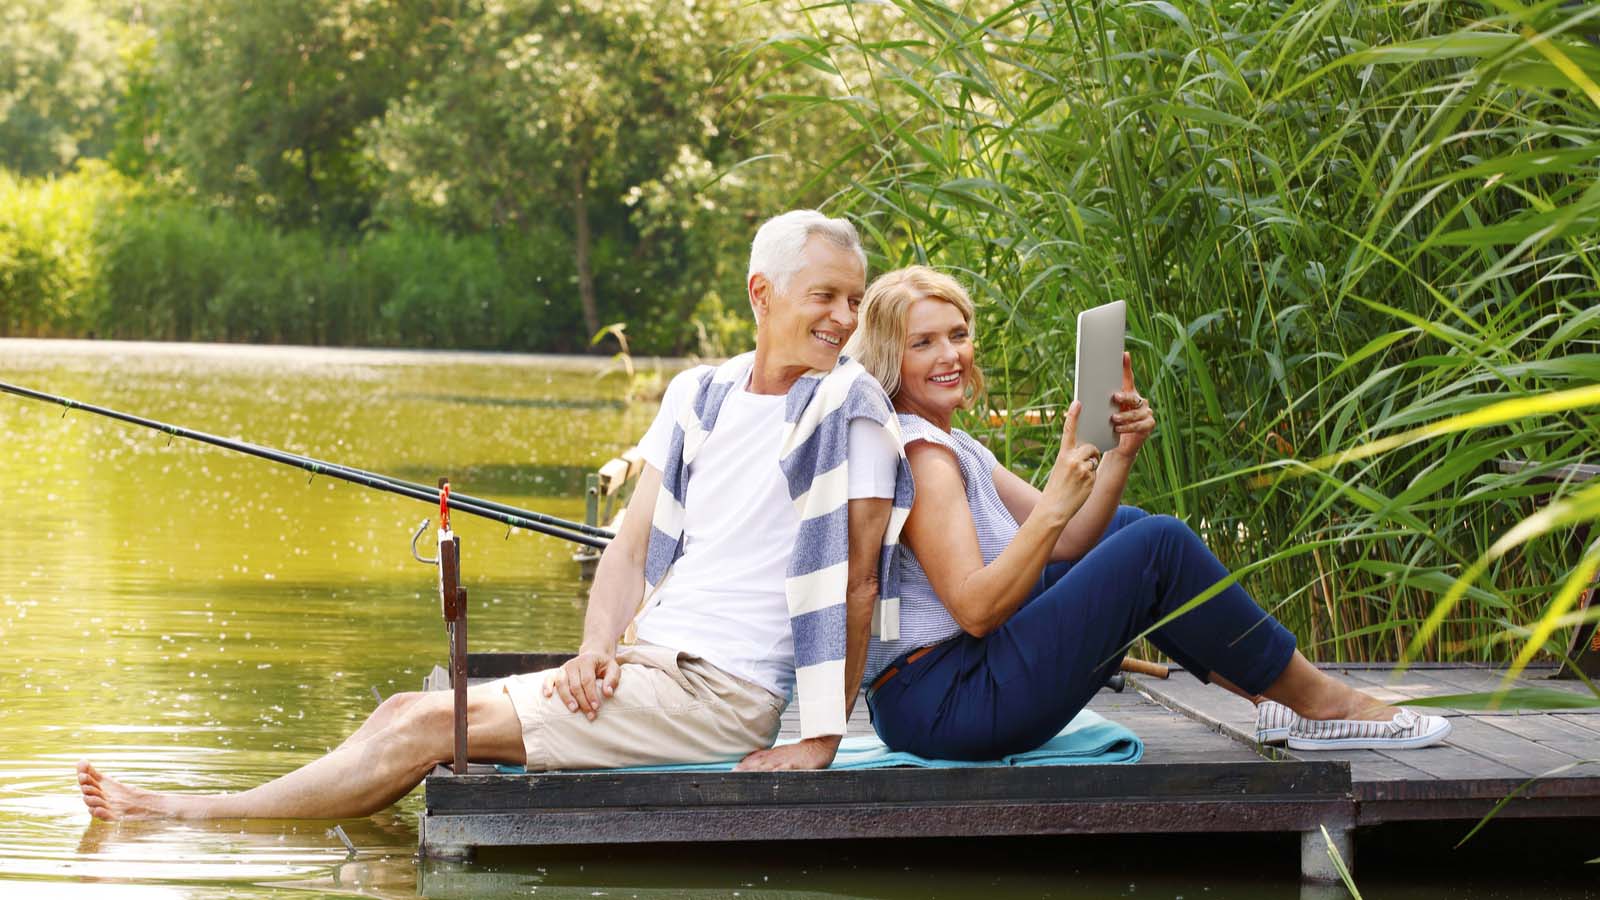 7 ‘A-Rated’ Retirement Stocks to Buy for Your Golden Years